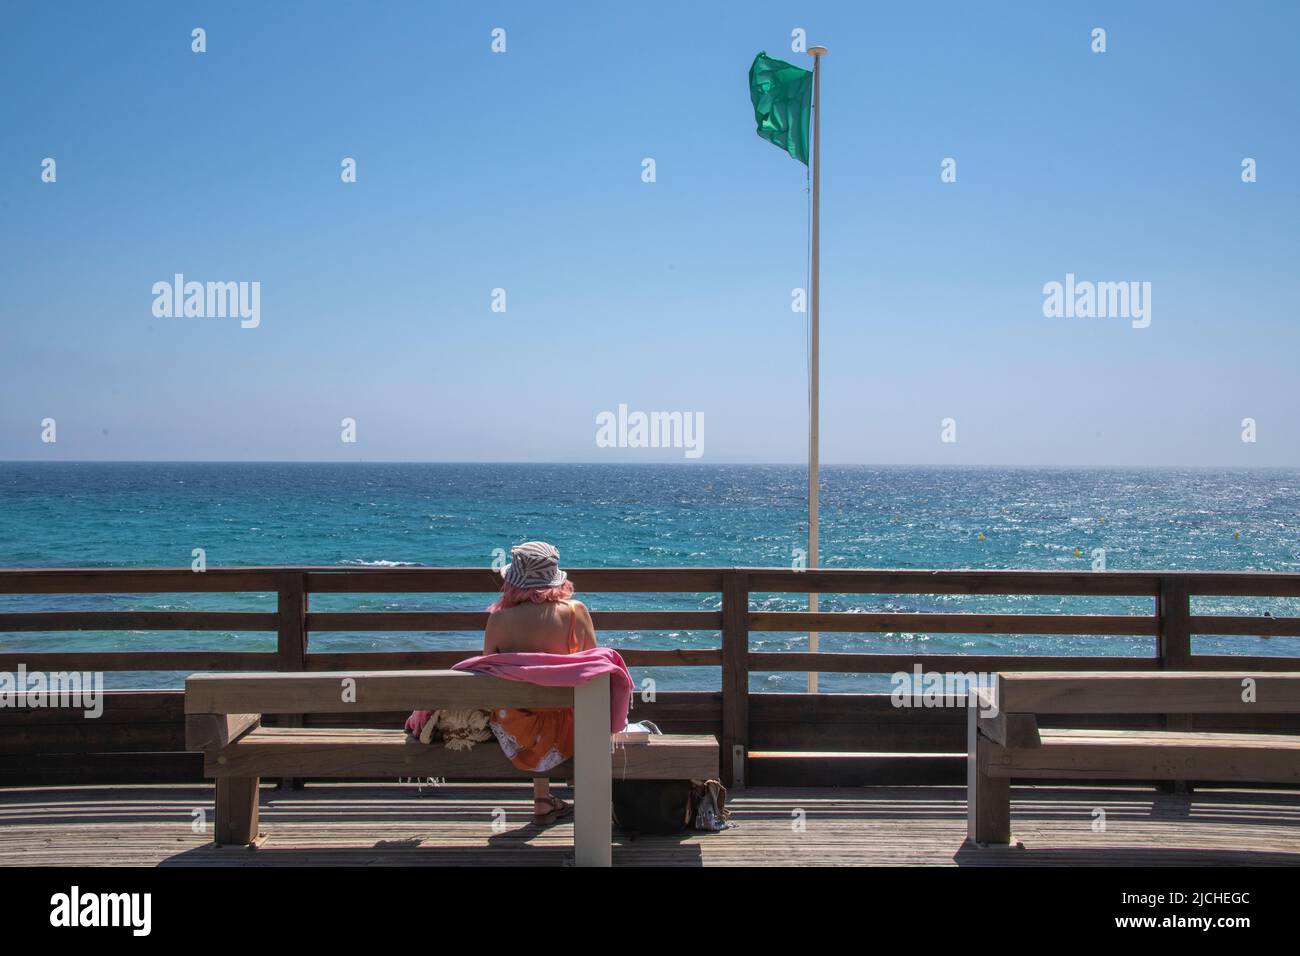 A women sitting on a bench looks out to sea at Gigaro Beach, Var, Provence-Alpes-Côte d'Azur, France. Stock Photo